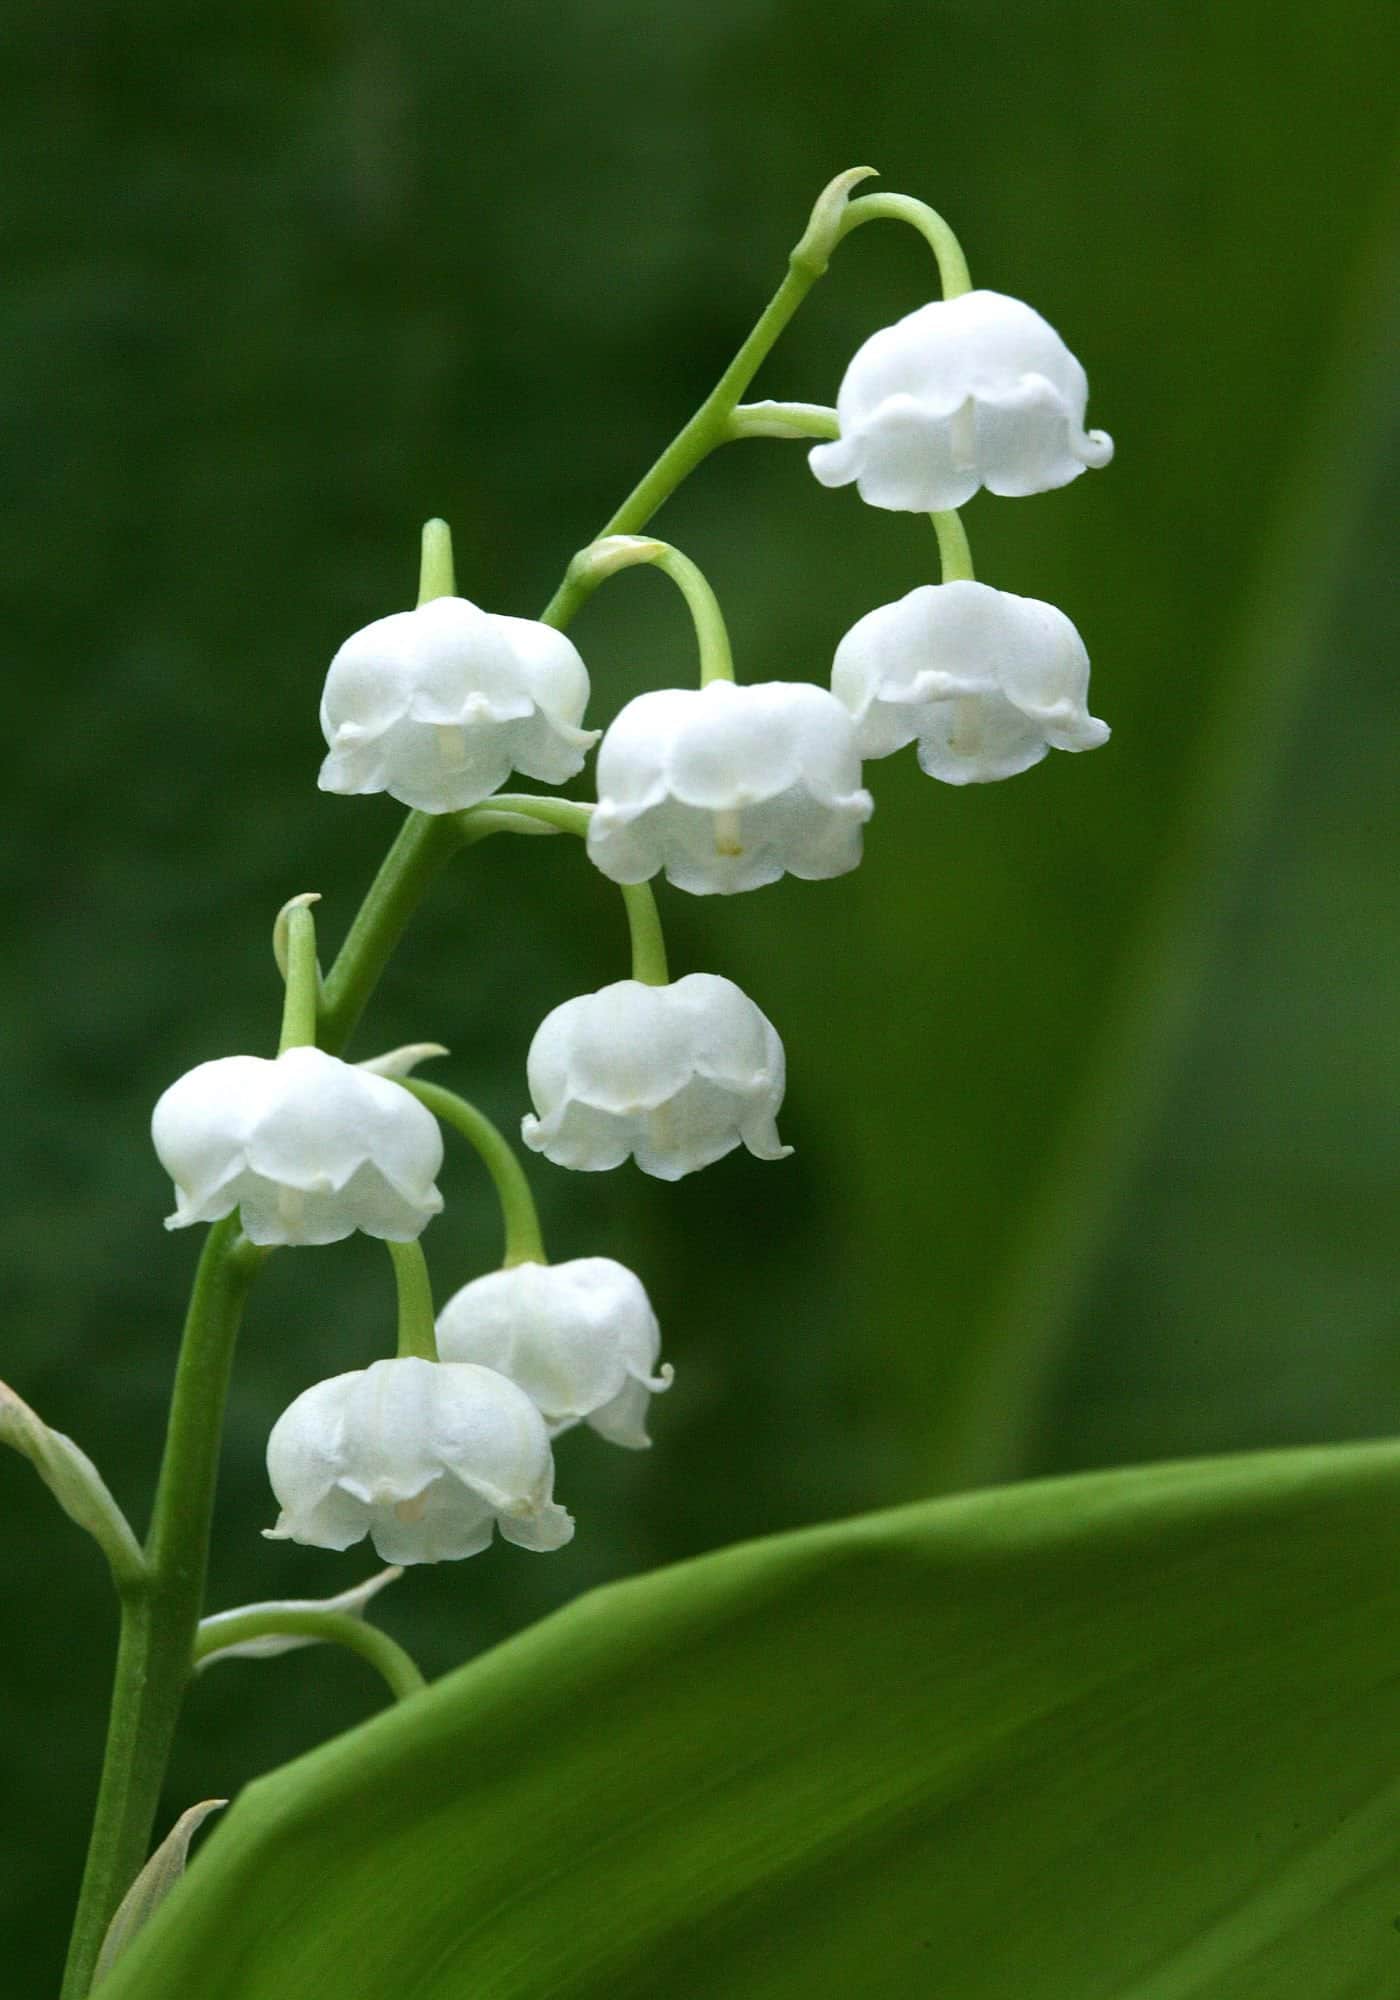 Shade plant - lily of the valley (convallaria majalis)